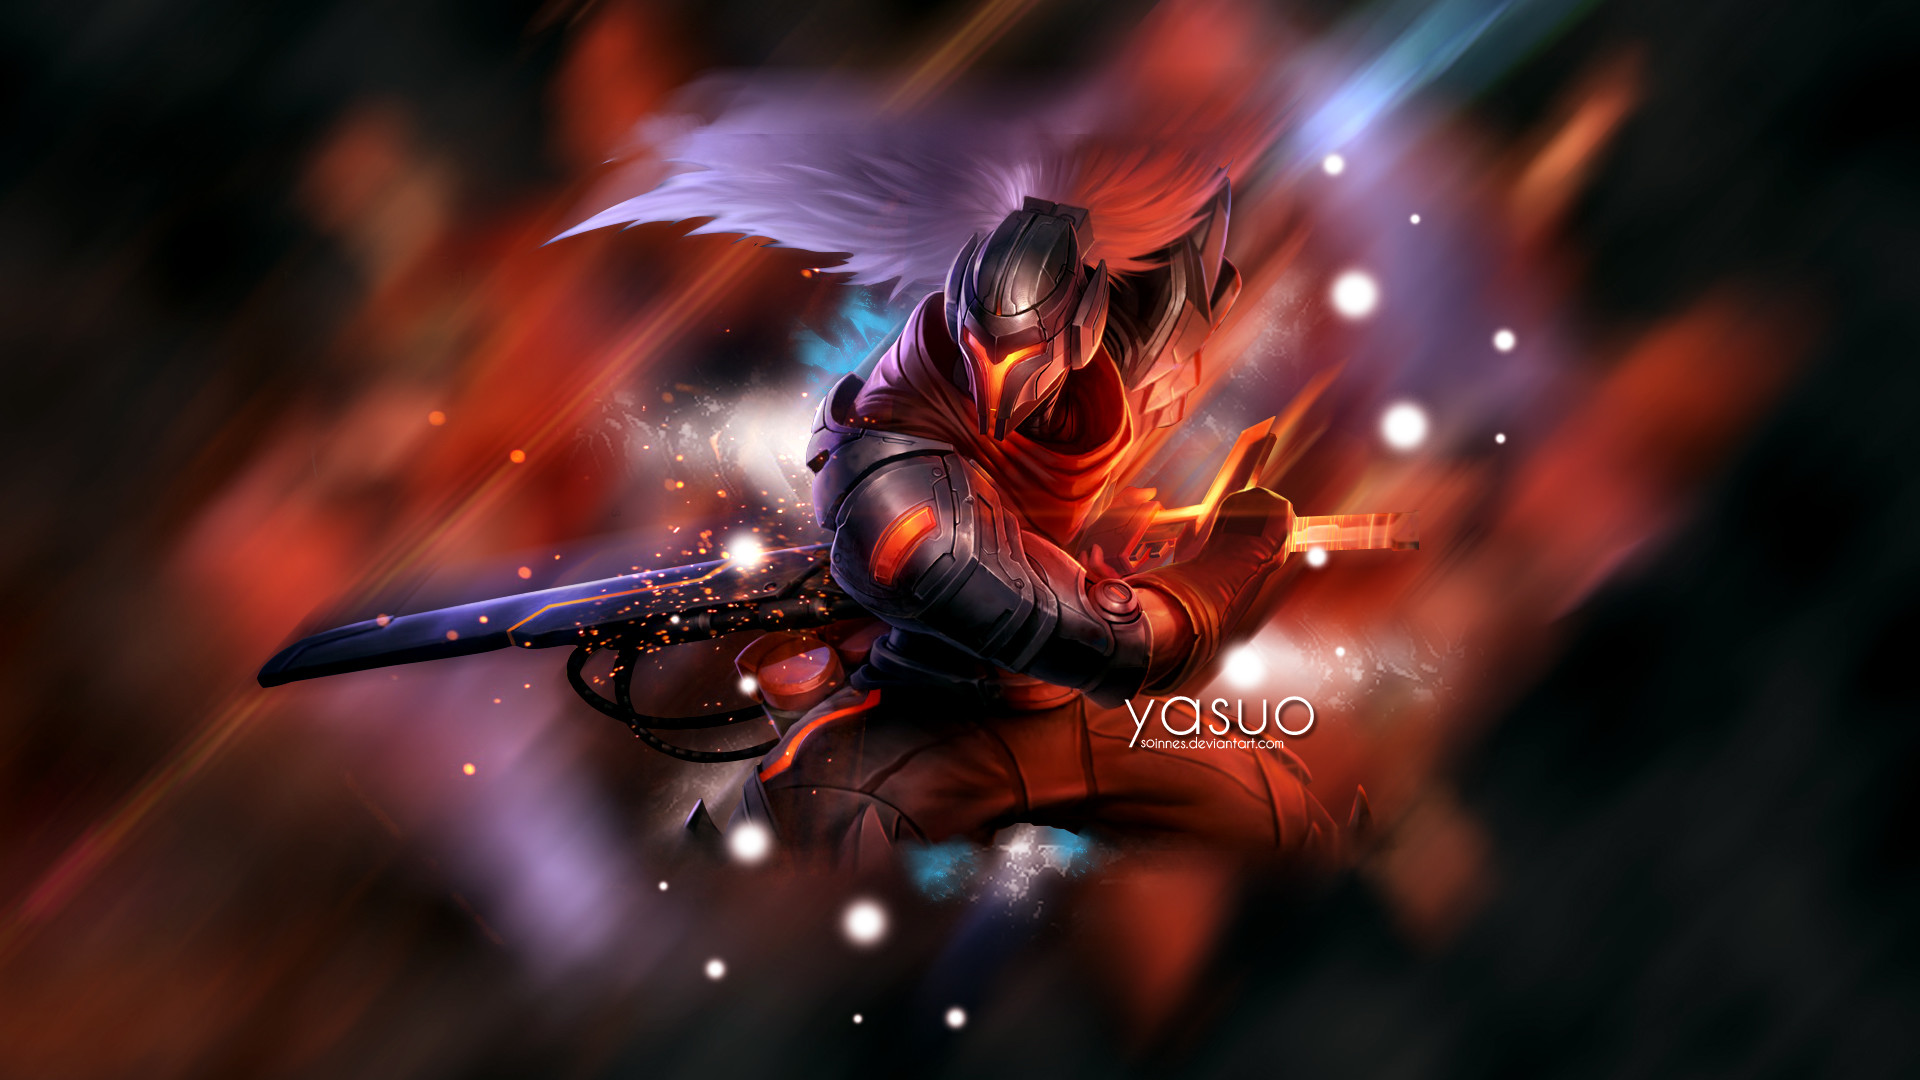 1920x1080 PROJECT: Yasuo wallpaper